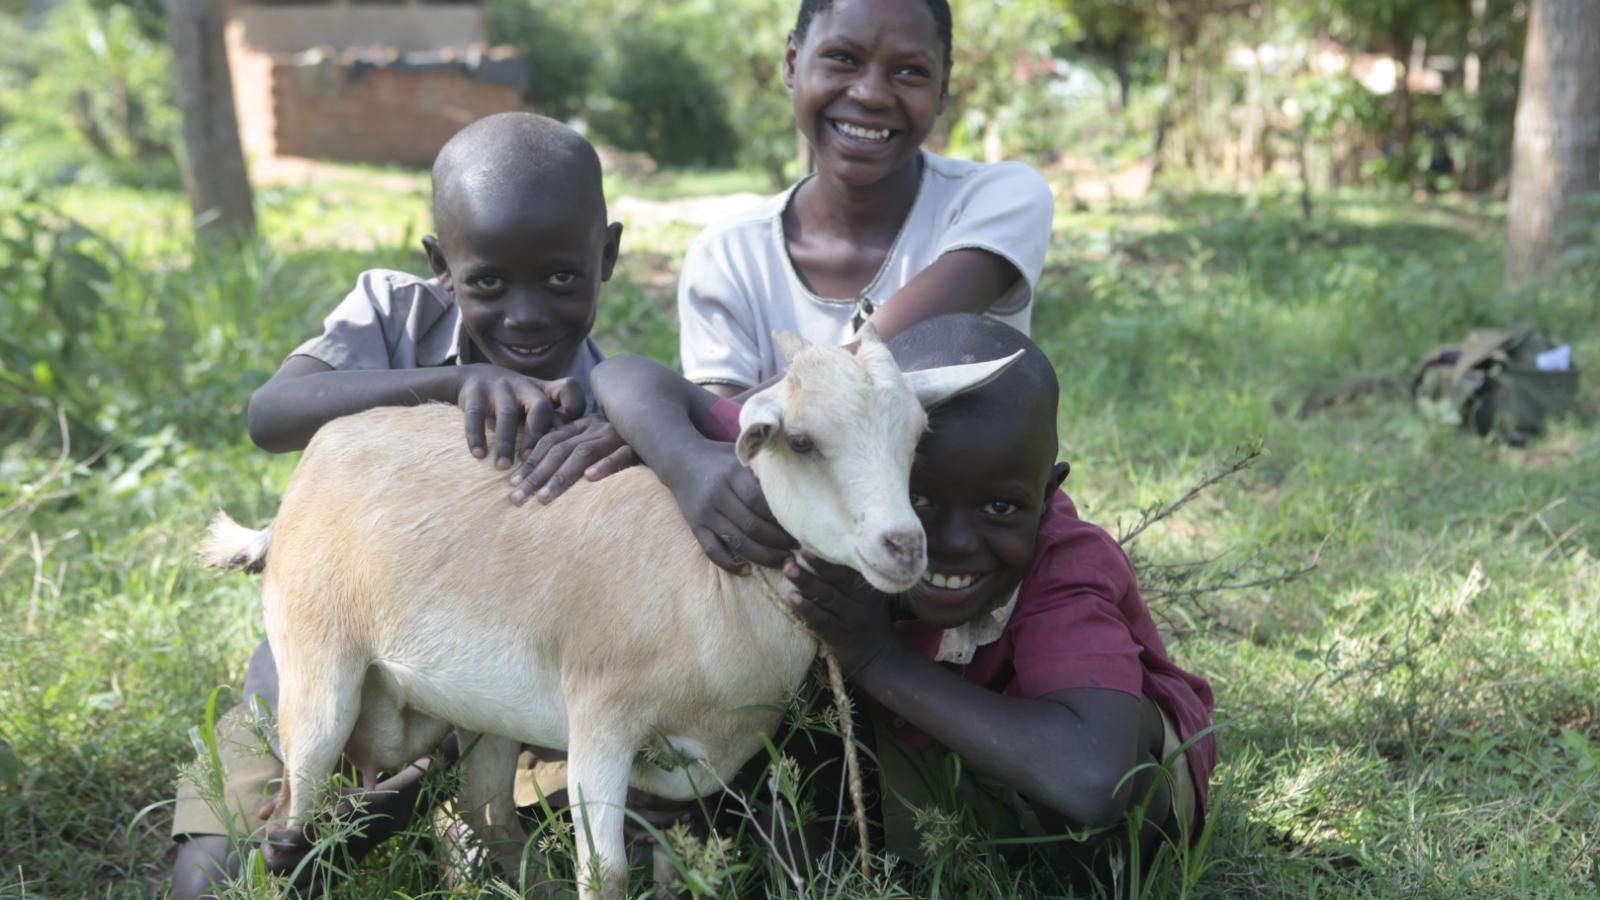 Gift of an in-kid dairy goat